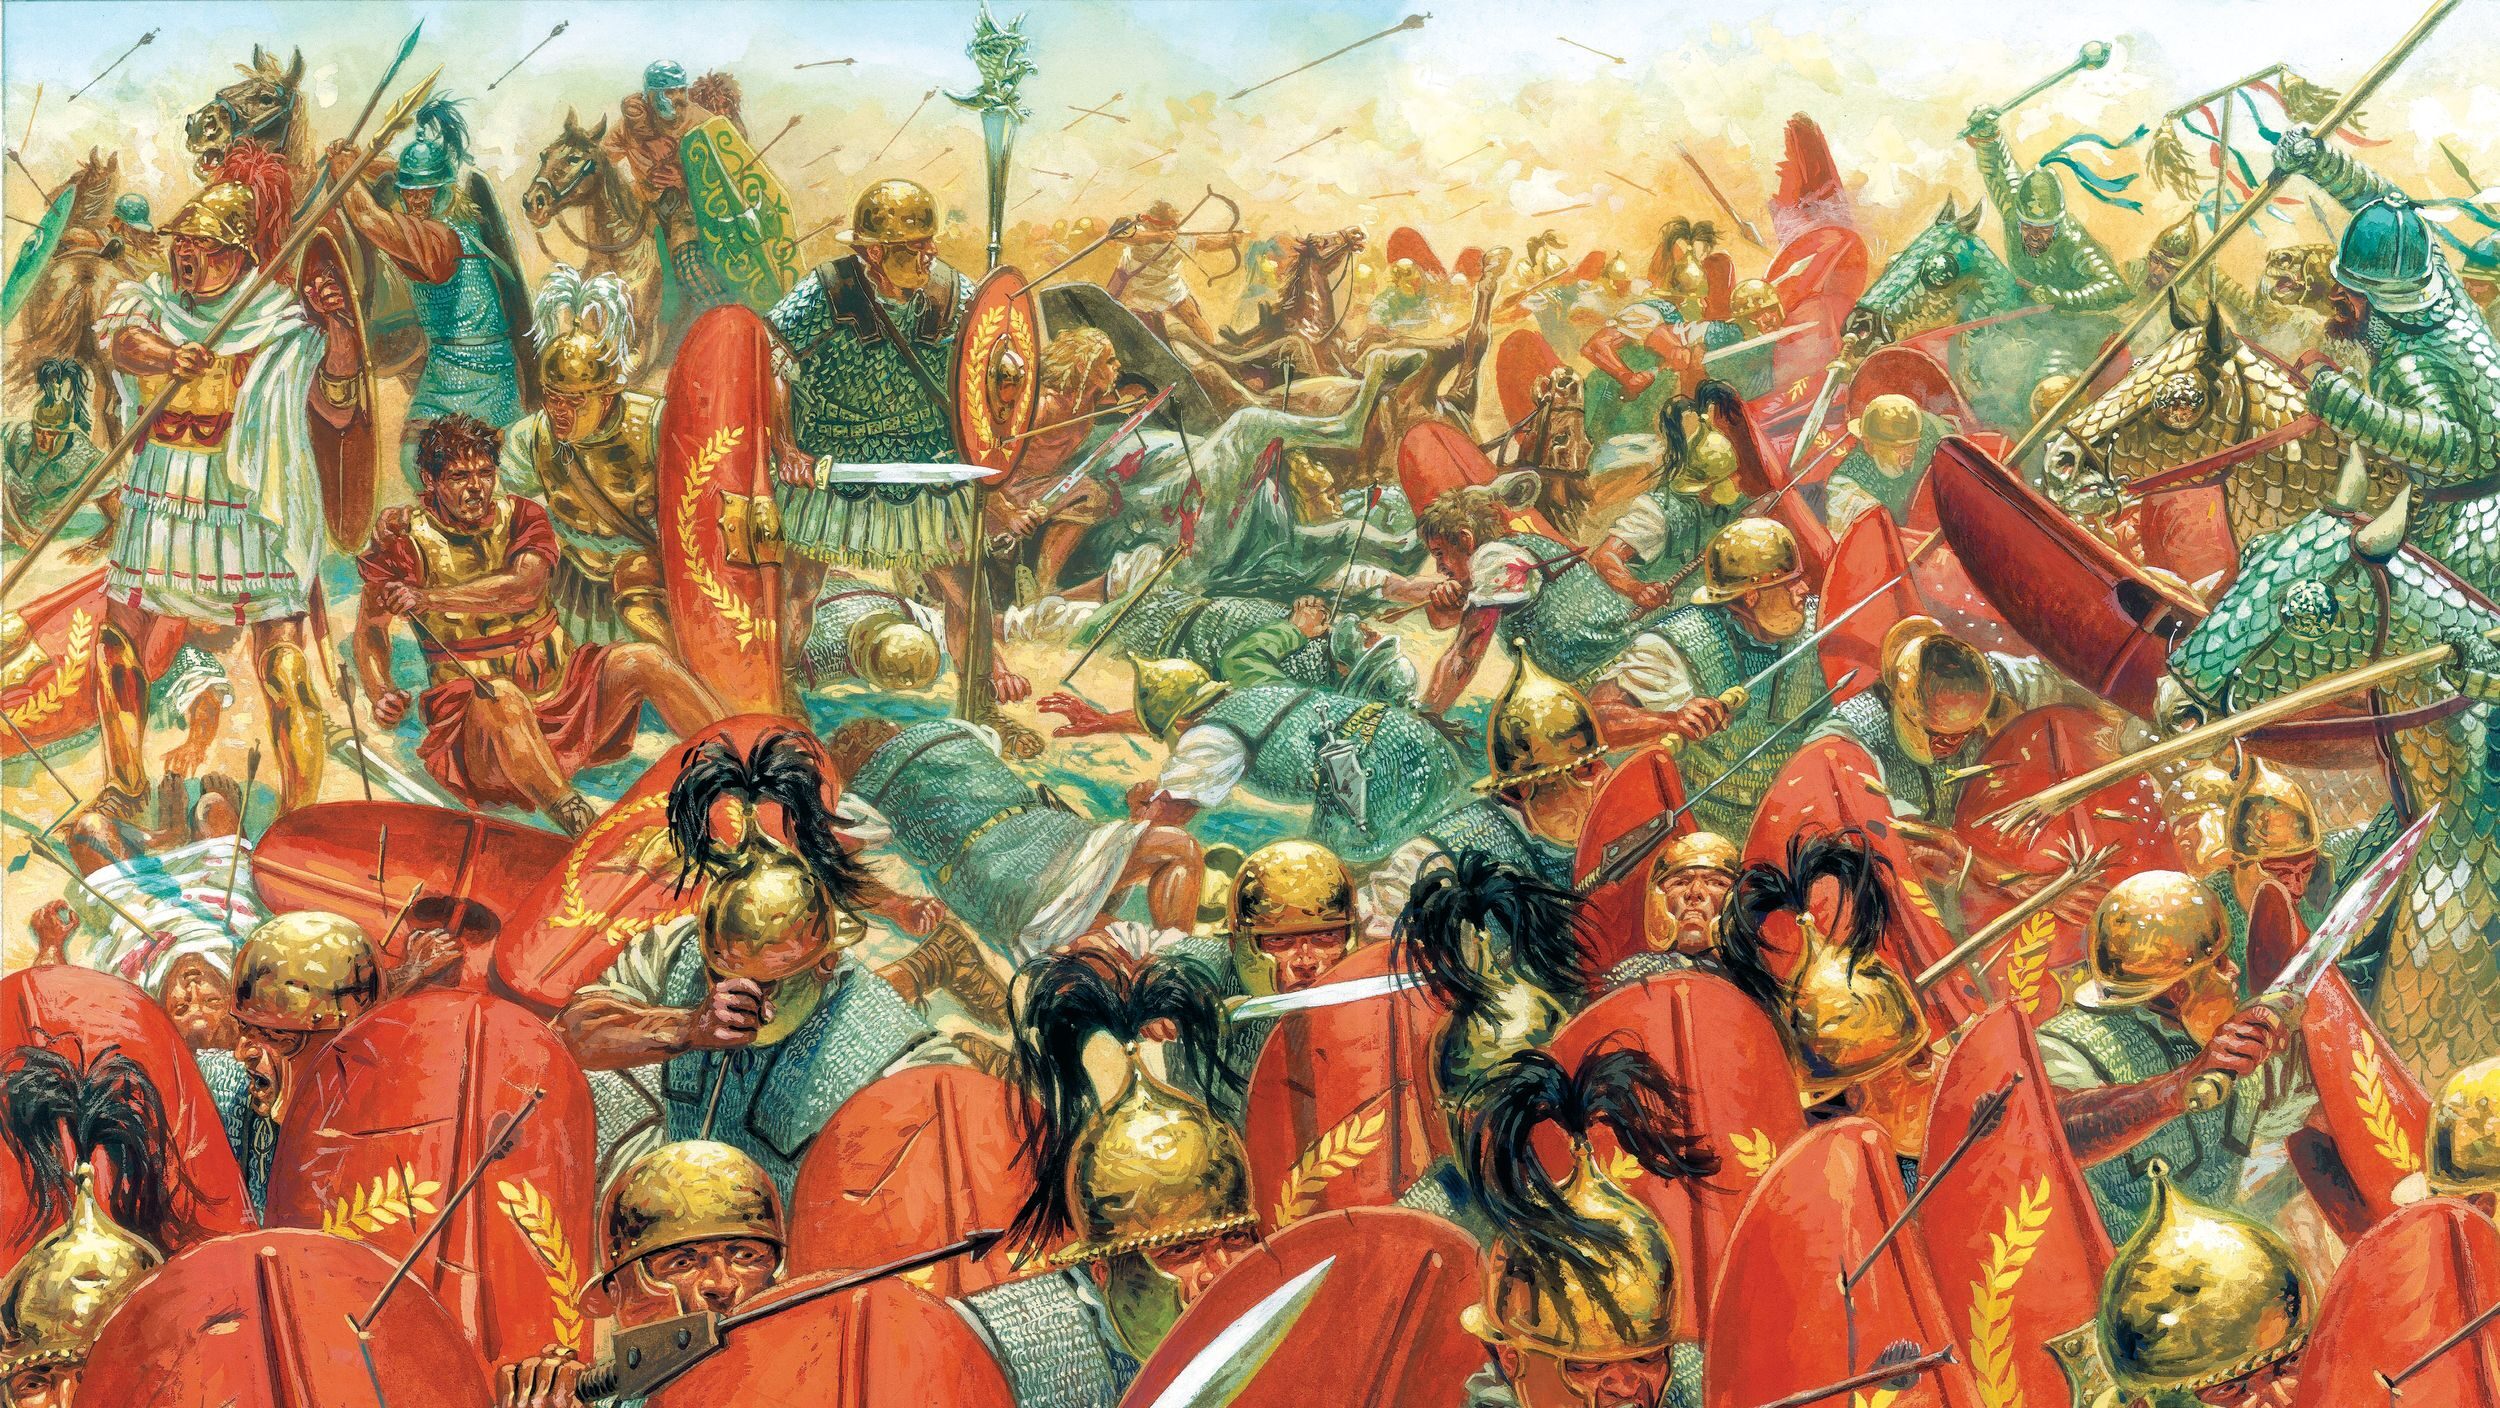 Marcus Licinius Crassus sought glory on the battlefield by following in the footsteps of his idol, Alexander III. It all came crashing down at Carrhae (in modern-day Turkey) at the hands of the Parthian Empire in 53 BCE.